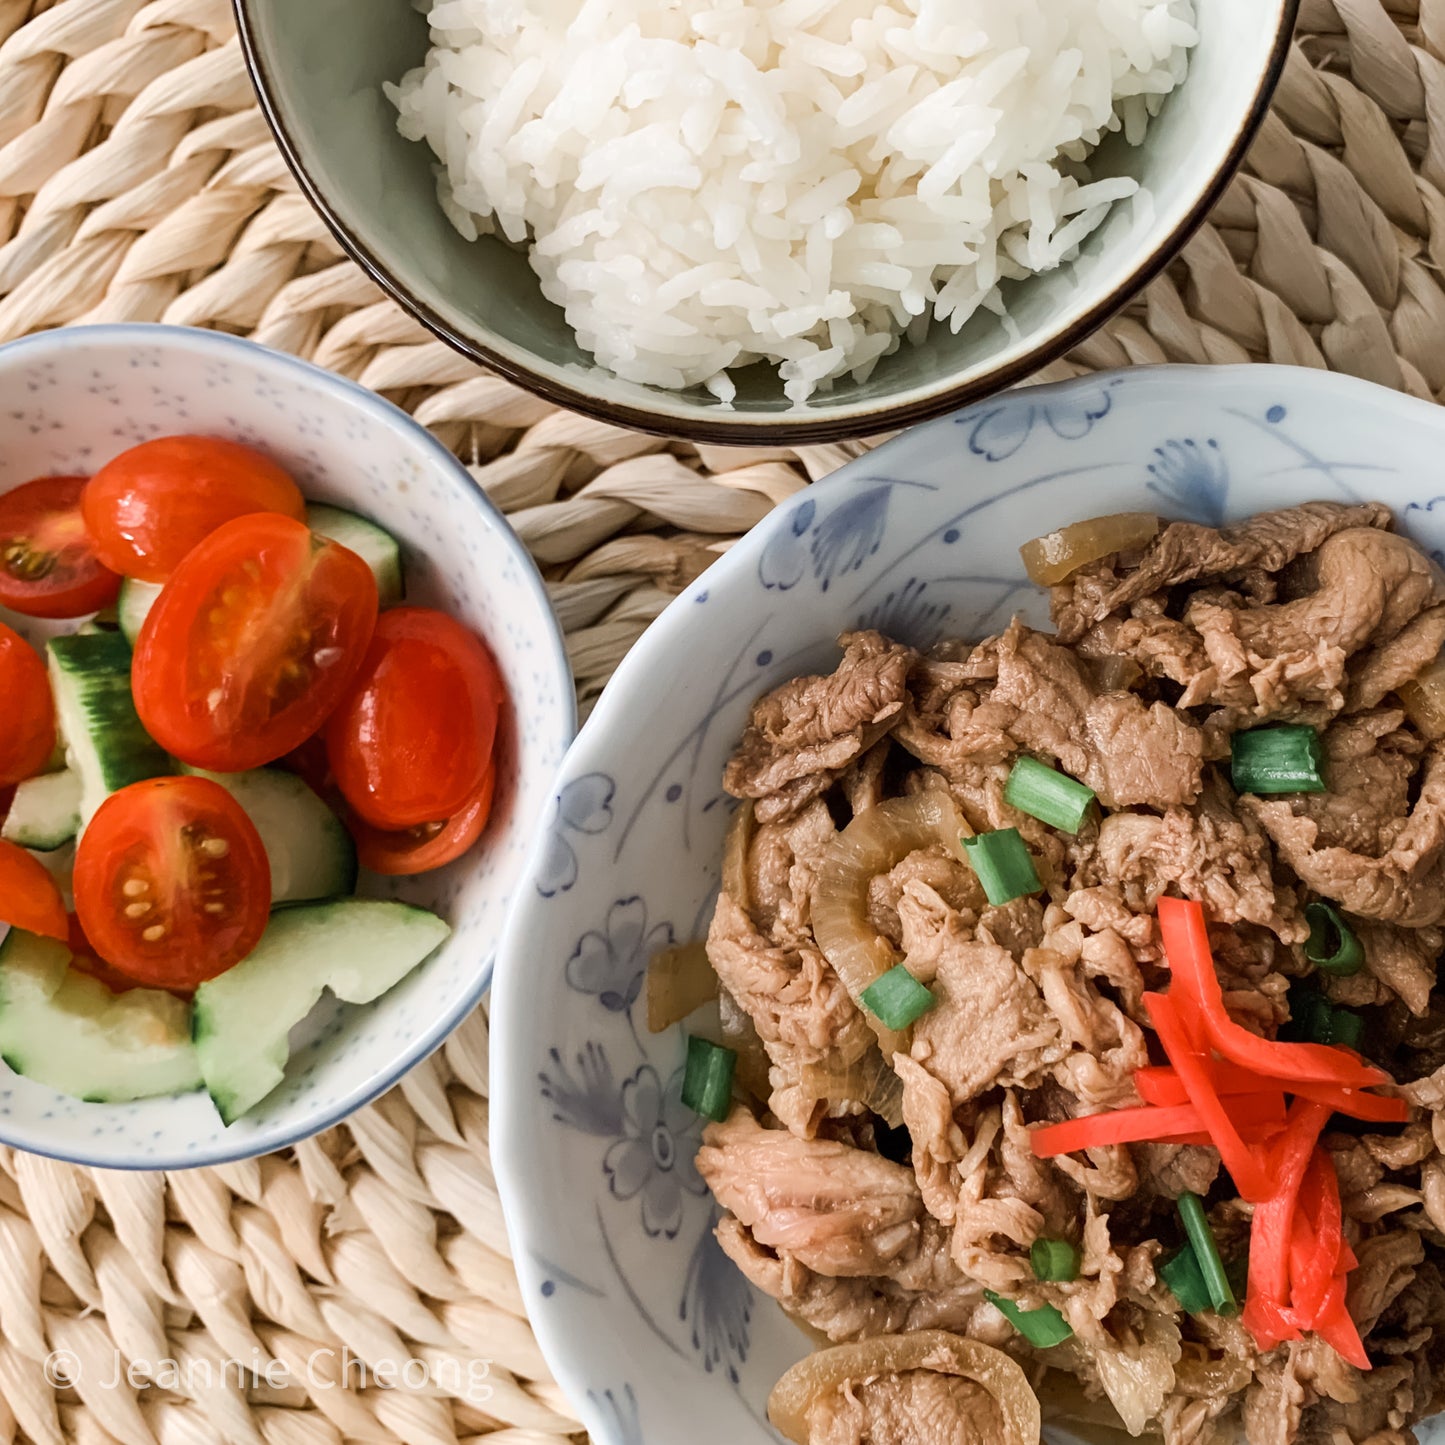 Simple Home Cooking: 26 kid-approved dishes for everyday meals (Simpleng Lutong Bahay)